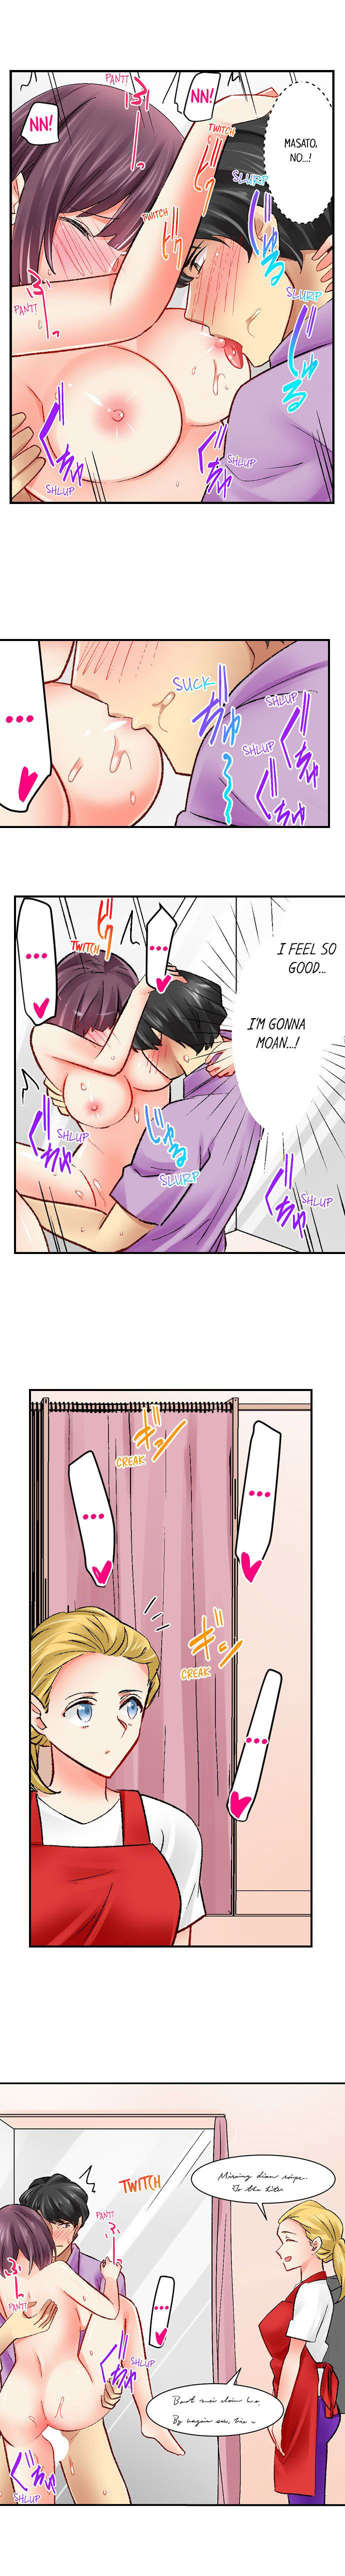 Our Kinky Newlywed Life Chapter 51 - Page 4